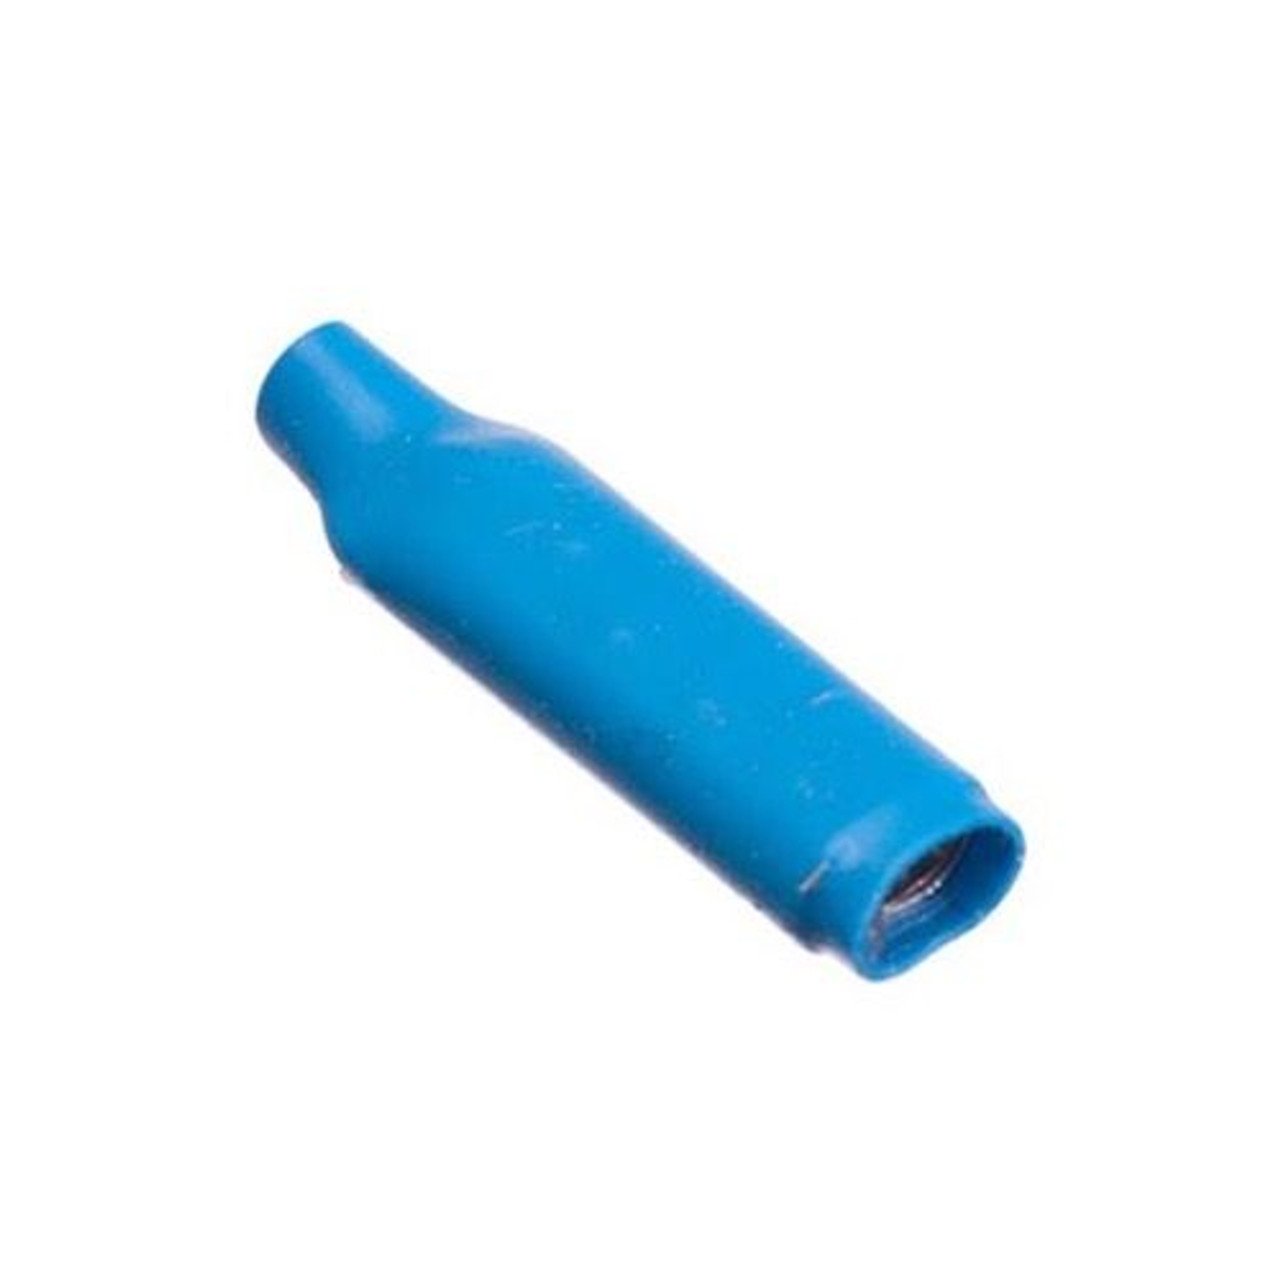 Eagle B-Wire Connector Bean with Gel Filled Blue Crimp Type Insulated Butt 19-26 AWG Solid Wire Copper Wire Splice, Sold as Singles